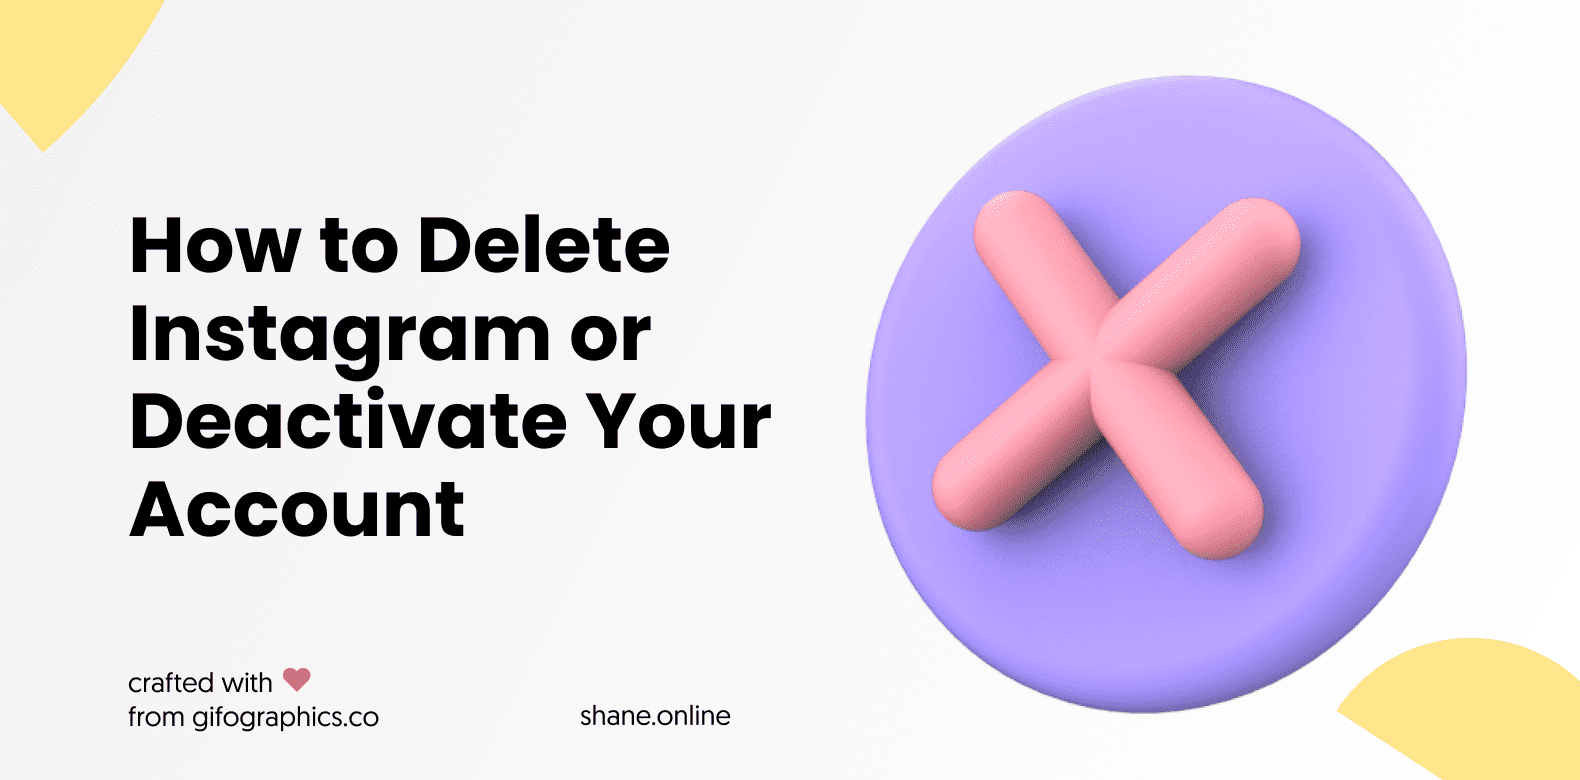 How to Delete Instagram or Deactivate Your Account in 2022